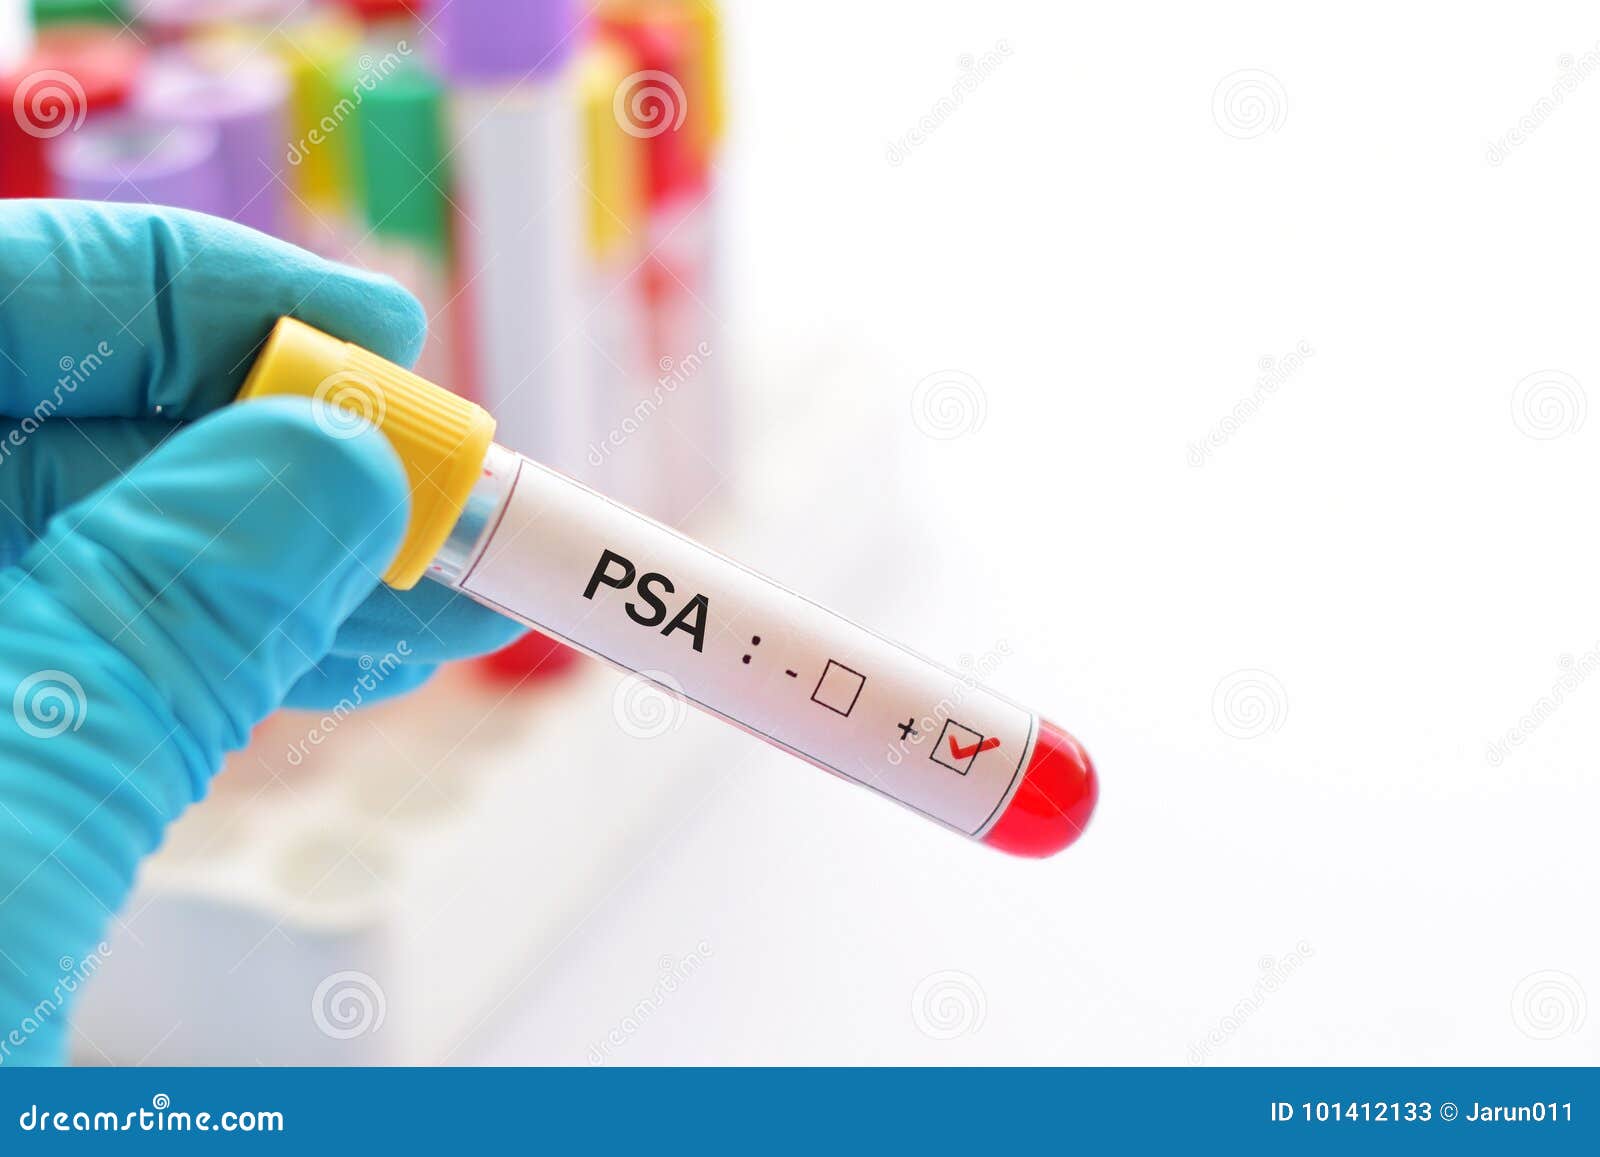 PSA positive stock image. Image of science, care, positive - 101412133